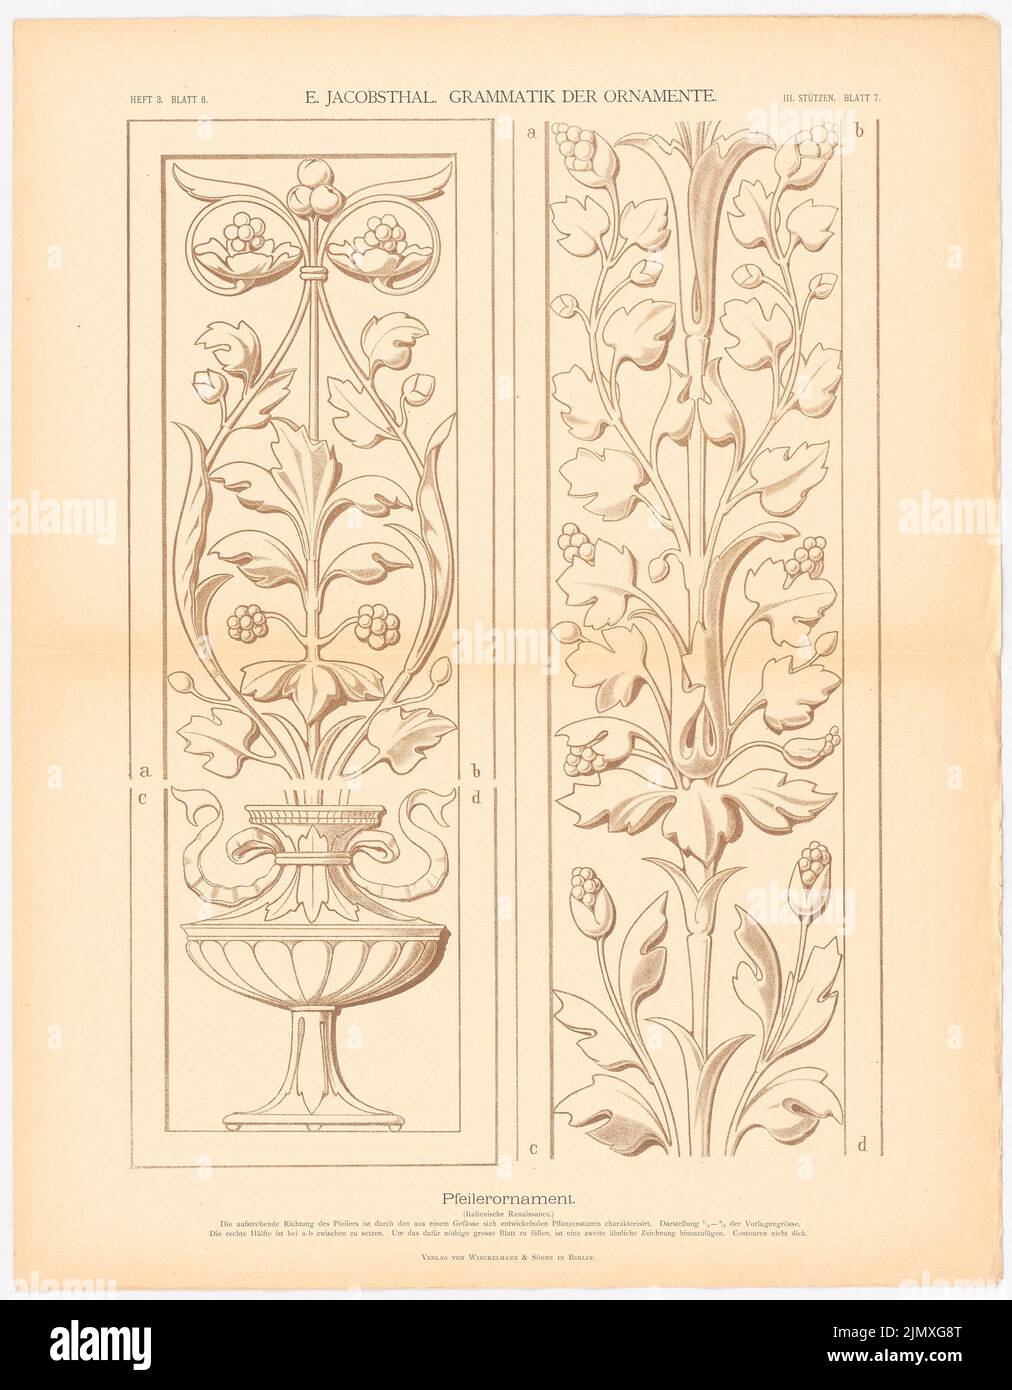 Jacobsthal Johann Eduard (1839-1902), grammar of the ornaments (without dat.): Pillar ornament, issue 3. sheet 6 .. lithograph on paper, 72.1 x 56.1 cm (incl. Scan edges) Jacobsthal Johann Eduard  (1839-1902): Grammatik der Ornamente Stock Photo